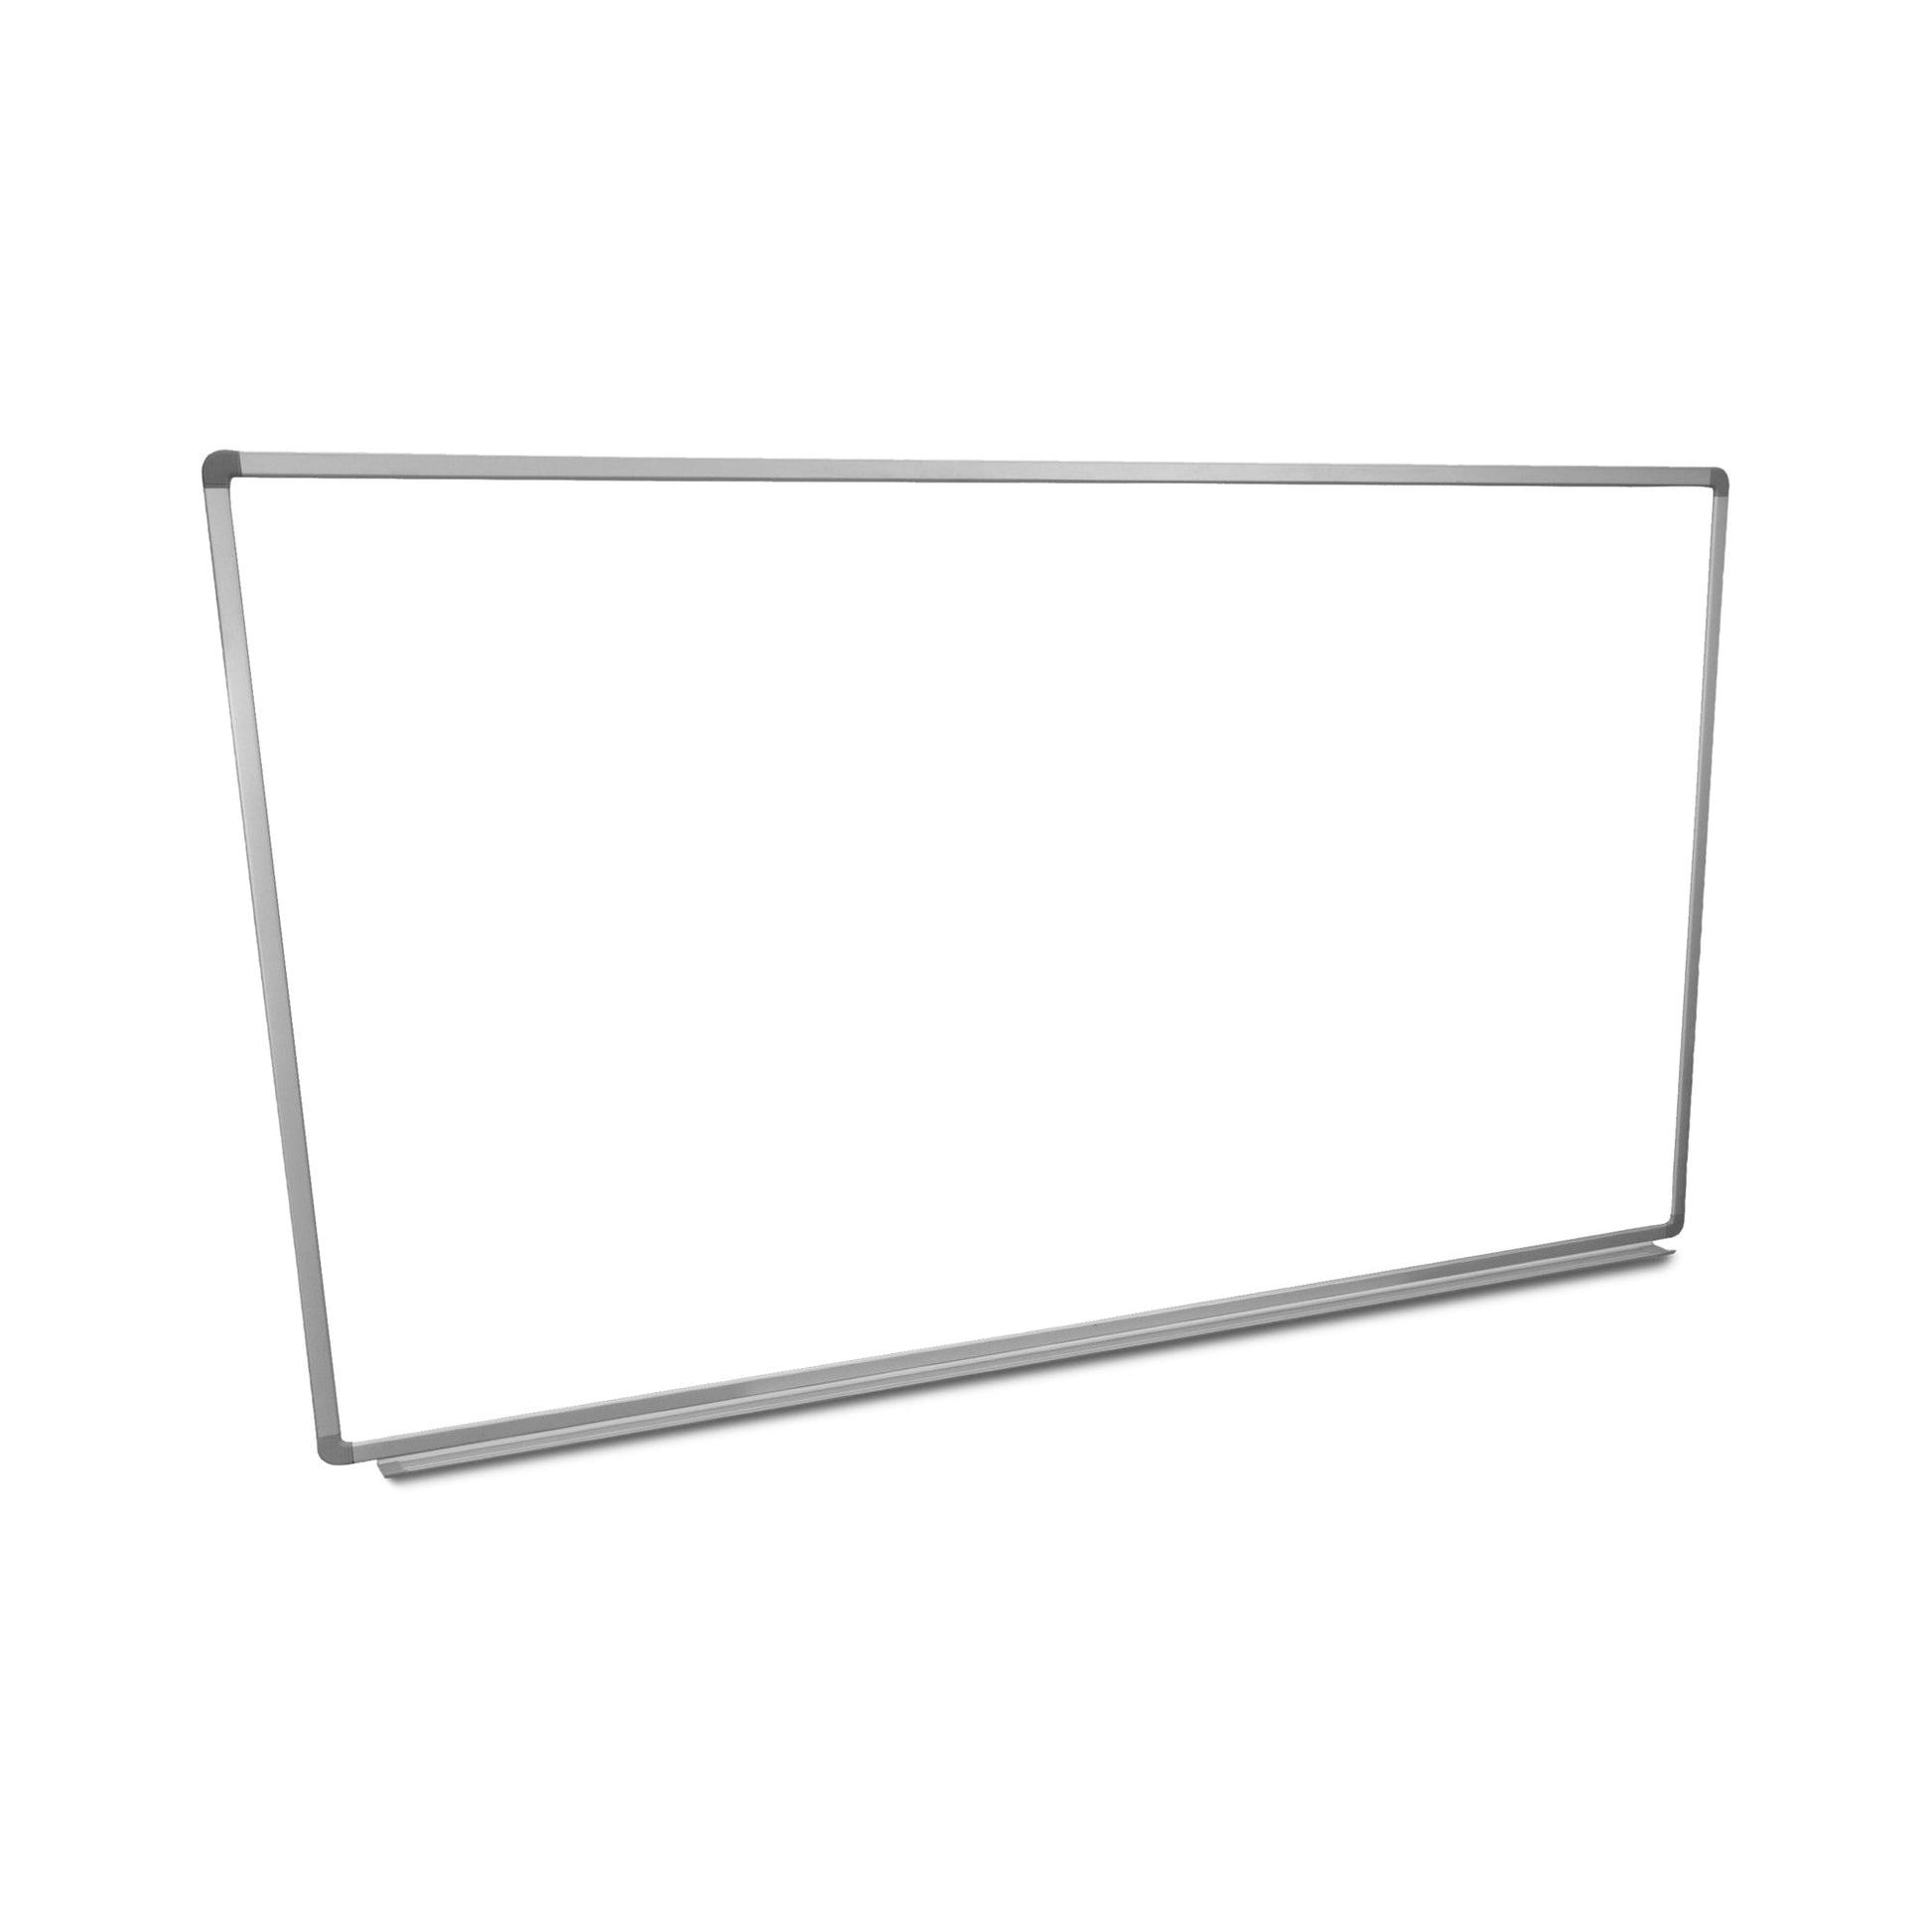 Luxor WB7240W - Wall-mounted Whiteboard 72"W x 40"H (LUX-WB7240W) - SchoolOutlet